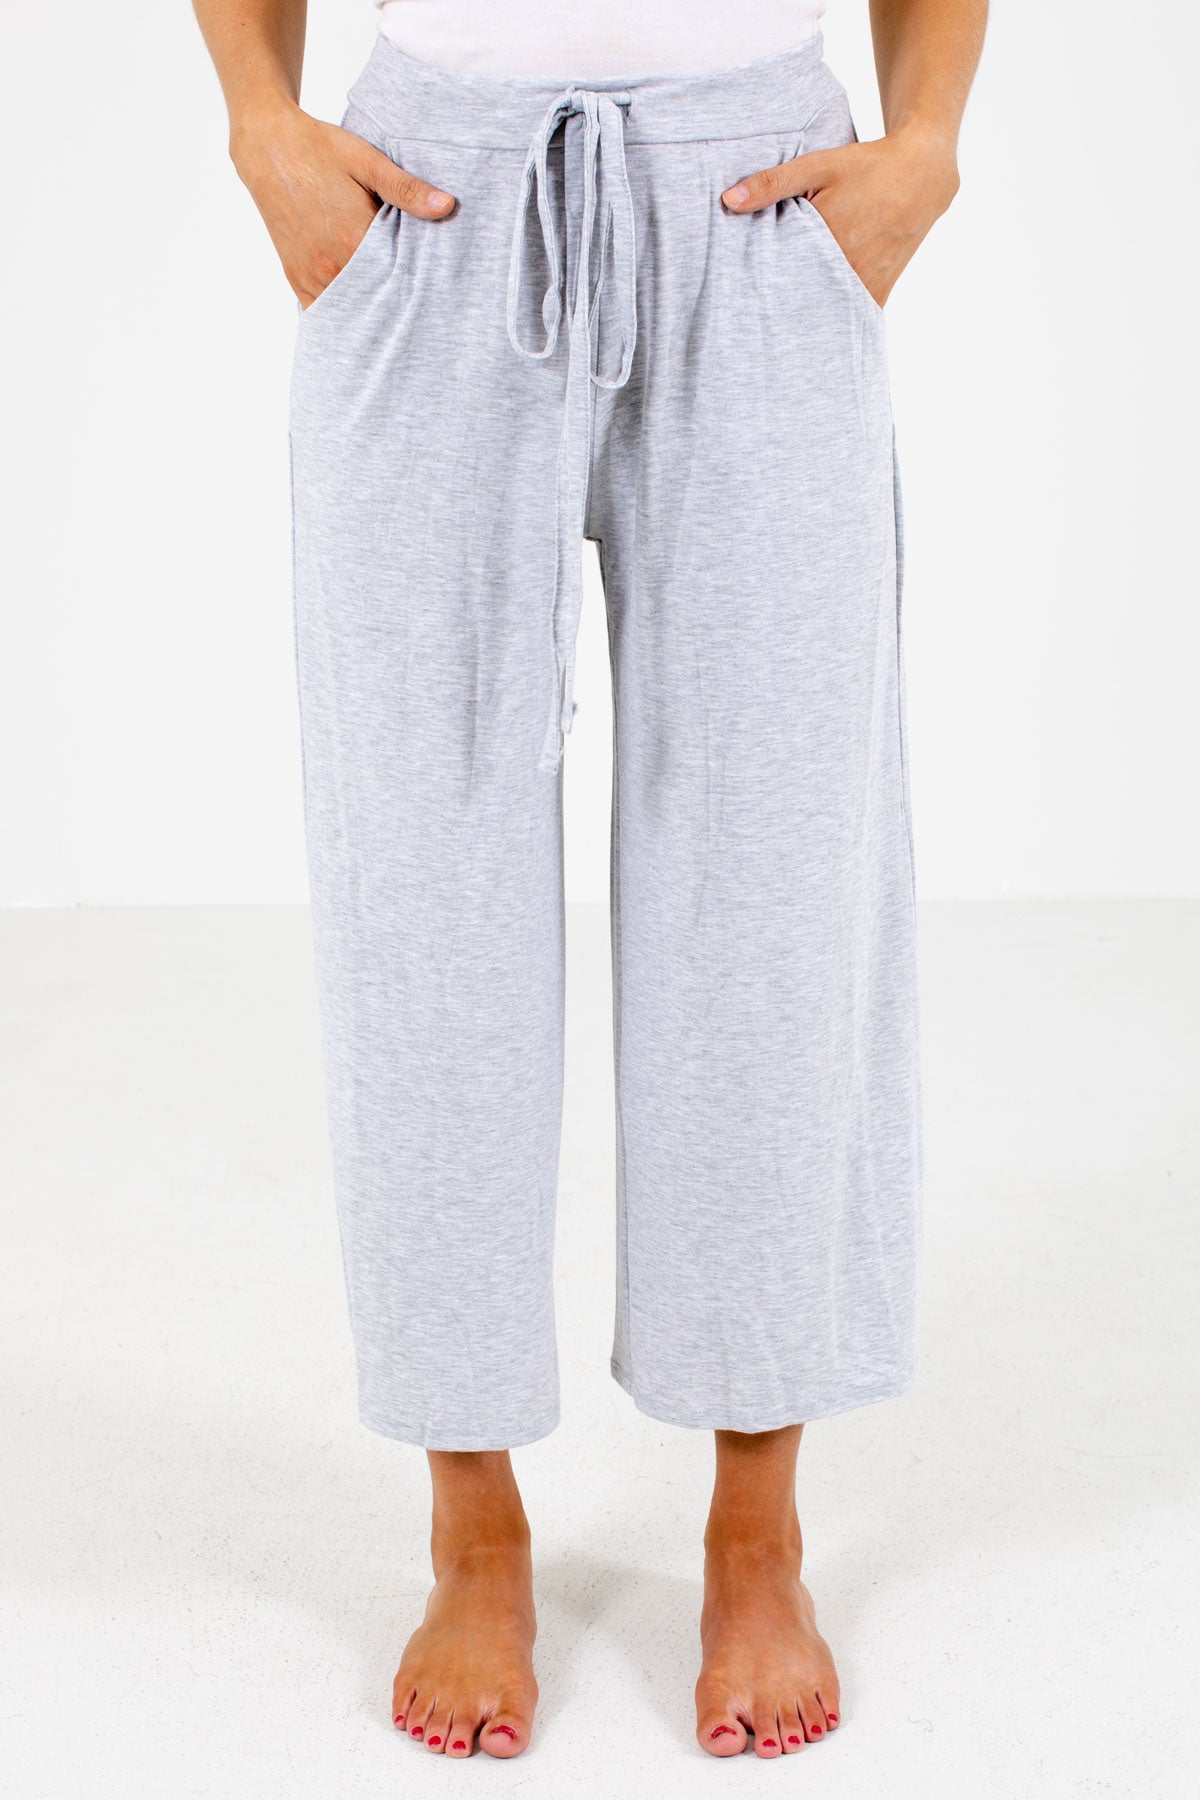 Gray Drawstring Waistband Boutique Pants for Women